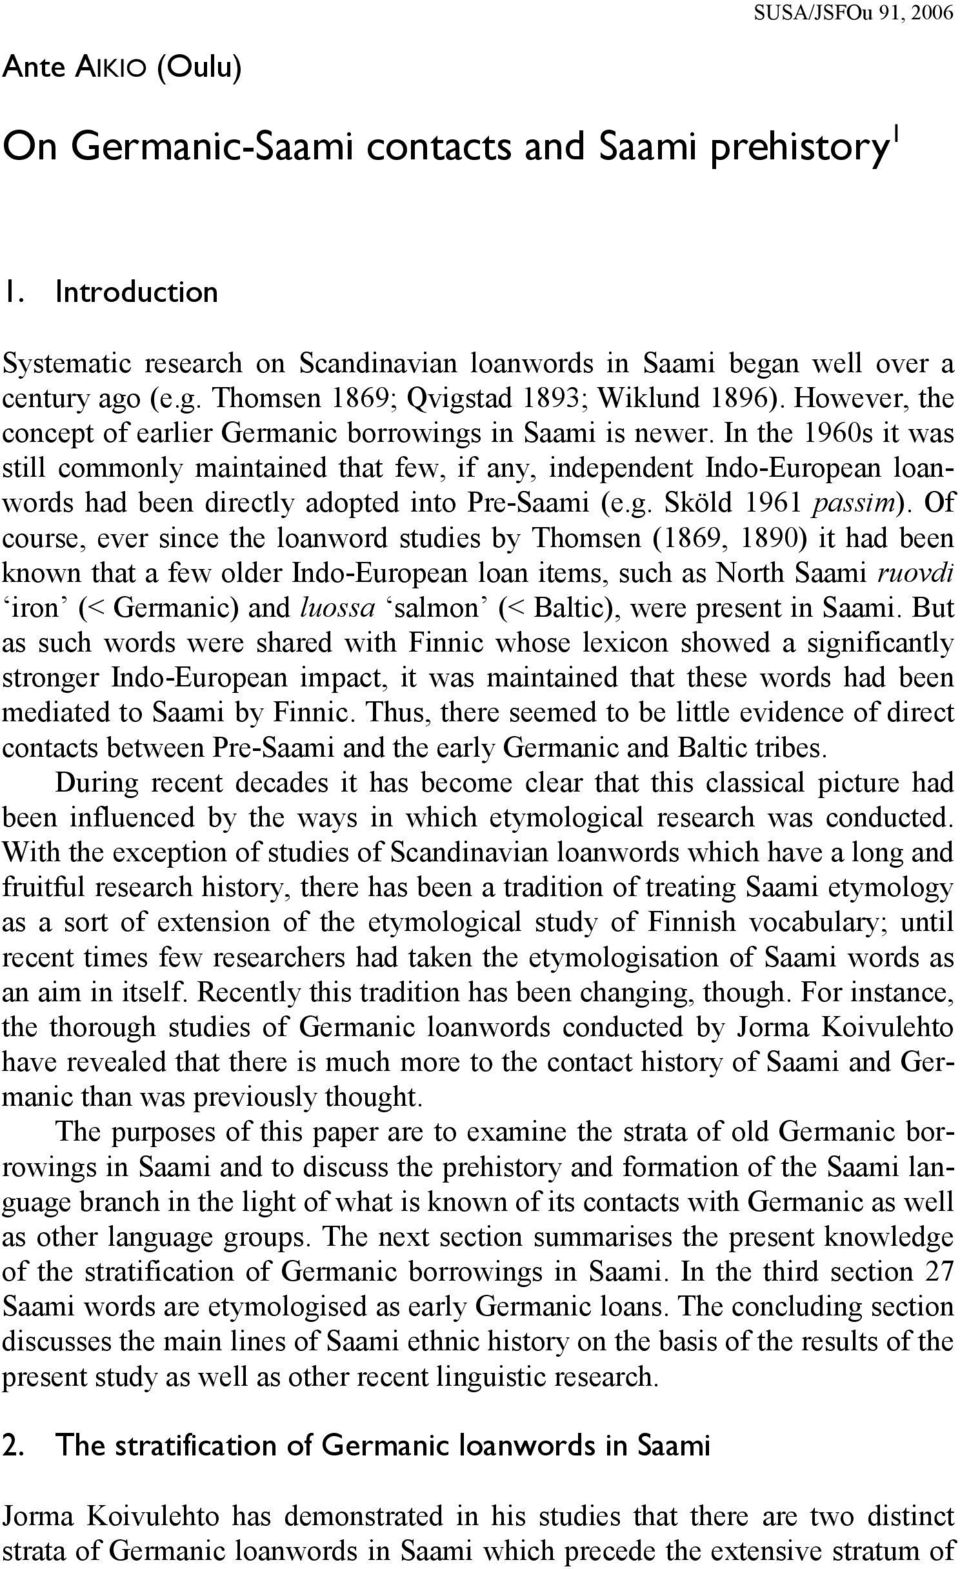 In the 1960s it was still commonly maintained that few, if any, independent Indo-European loanwords had been directly adopted into Pre-Saami (e.g. Sköld 1961 passim).